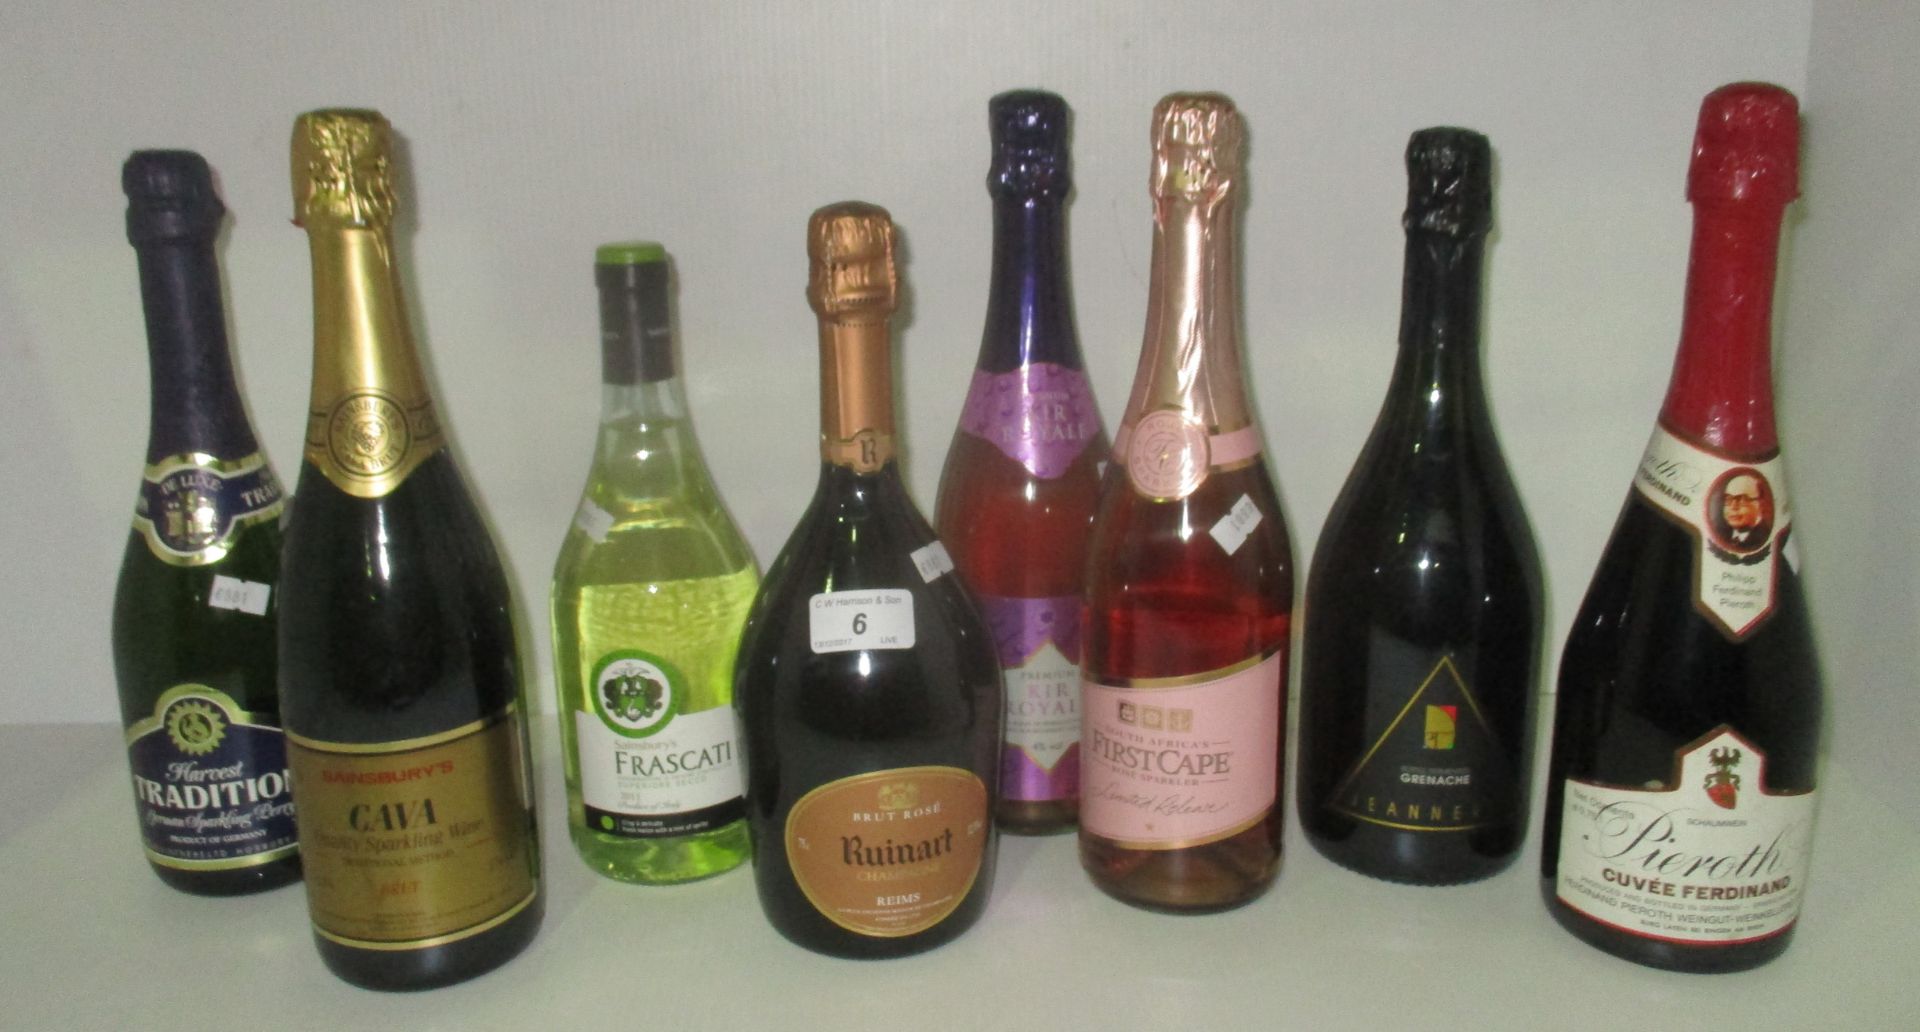 A selection of 8 bottles of mainly sparkling wine - 75cl Sainsbury's Cava,